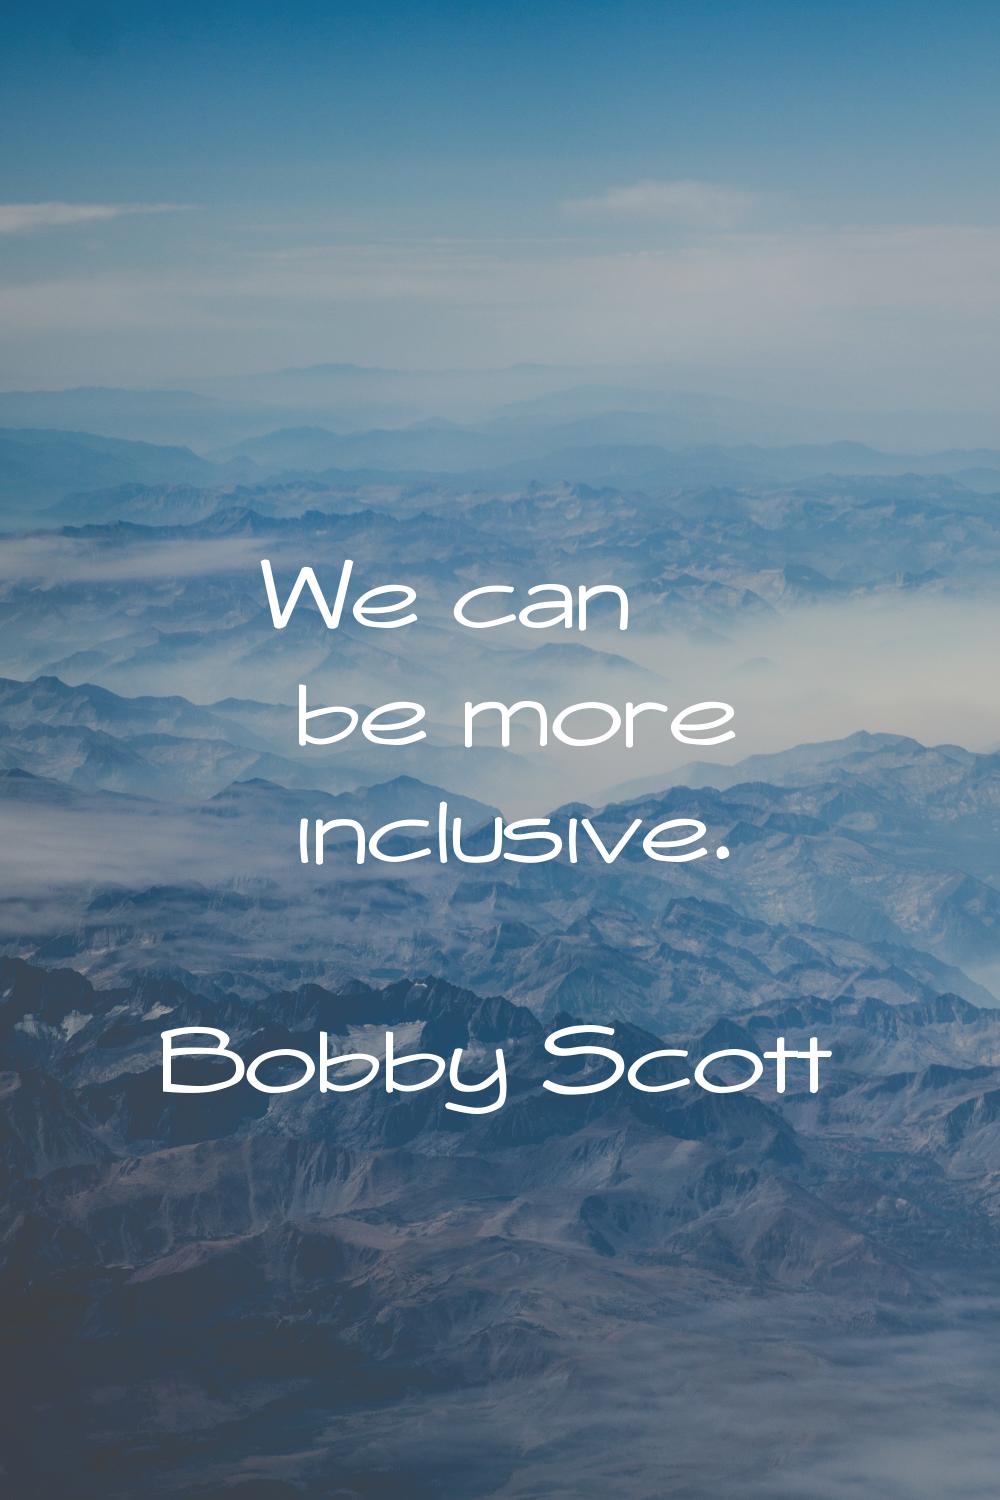 We can be more inclusive.